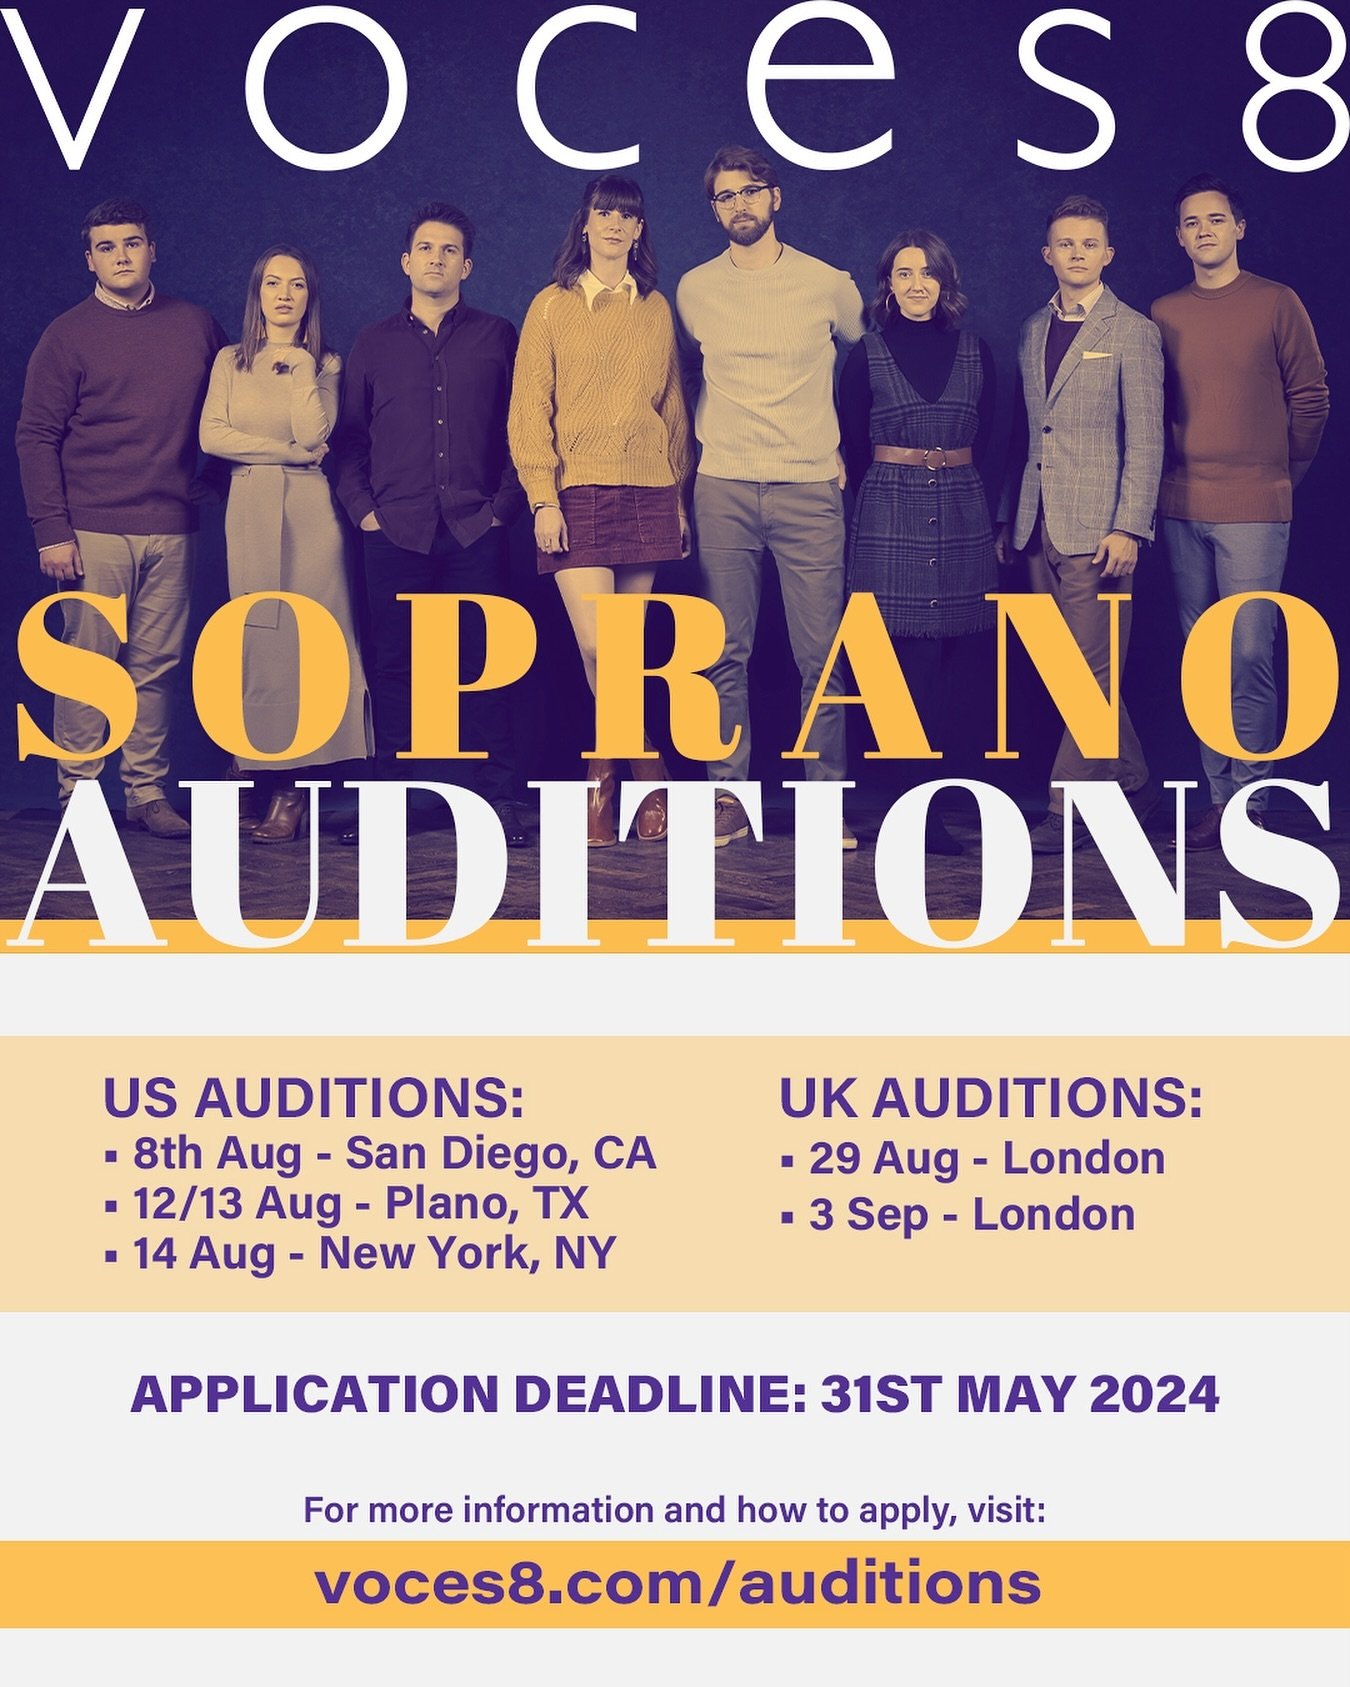 It&rsquo;s time for the SOPRANO SEARCH. 

We&rsquo;re seeking a new singer for VOCES8 - you can find all the details on our website at the link in our bio. 

&bull;&bull;&bull;&bull;&bull;&bull;&bull;&bull;&bull;&bull;

#soprano #sopranojob #choral #